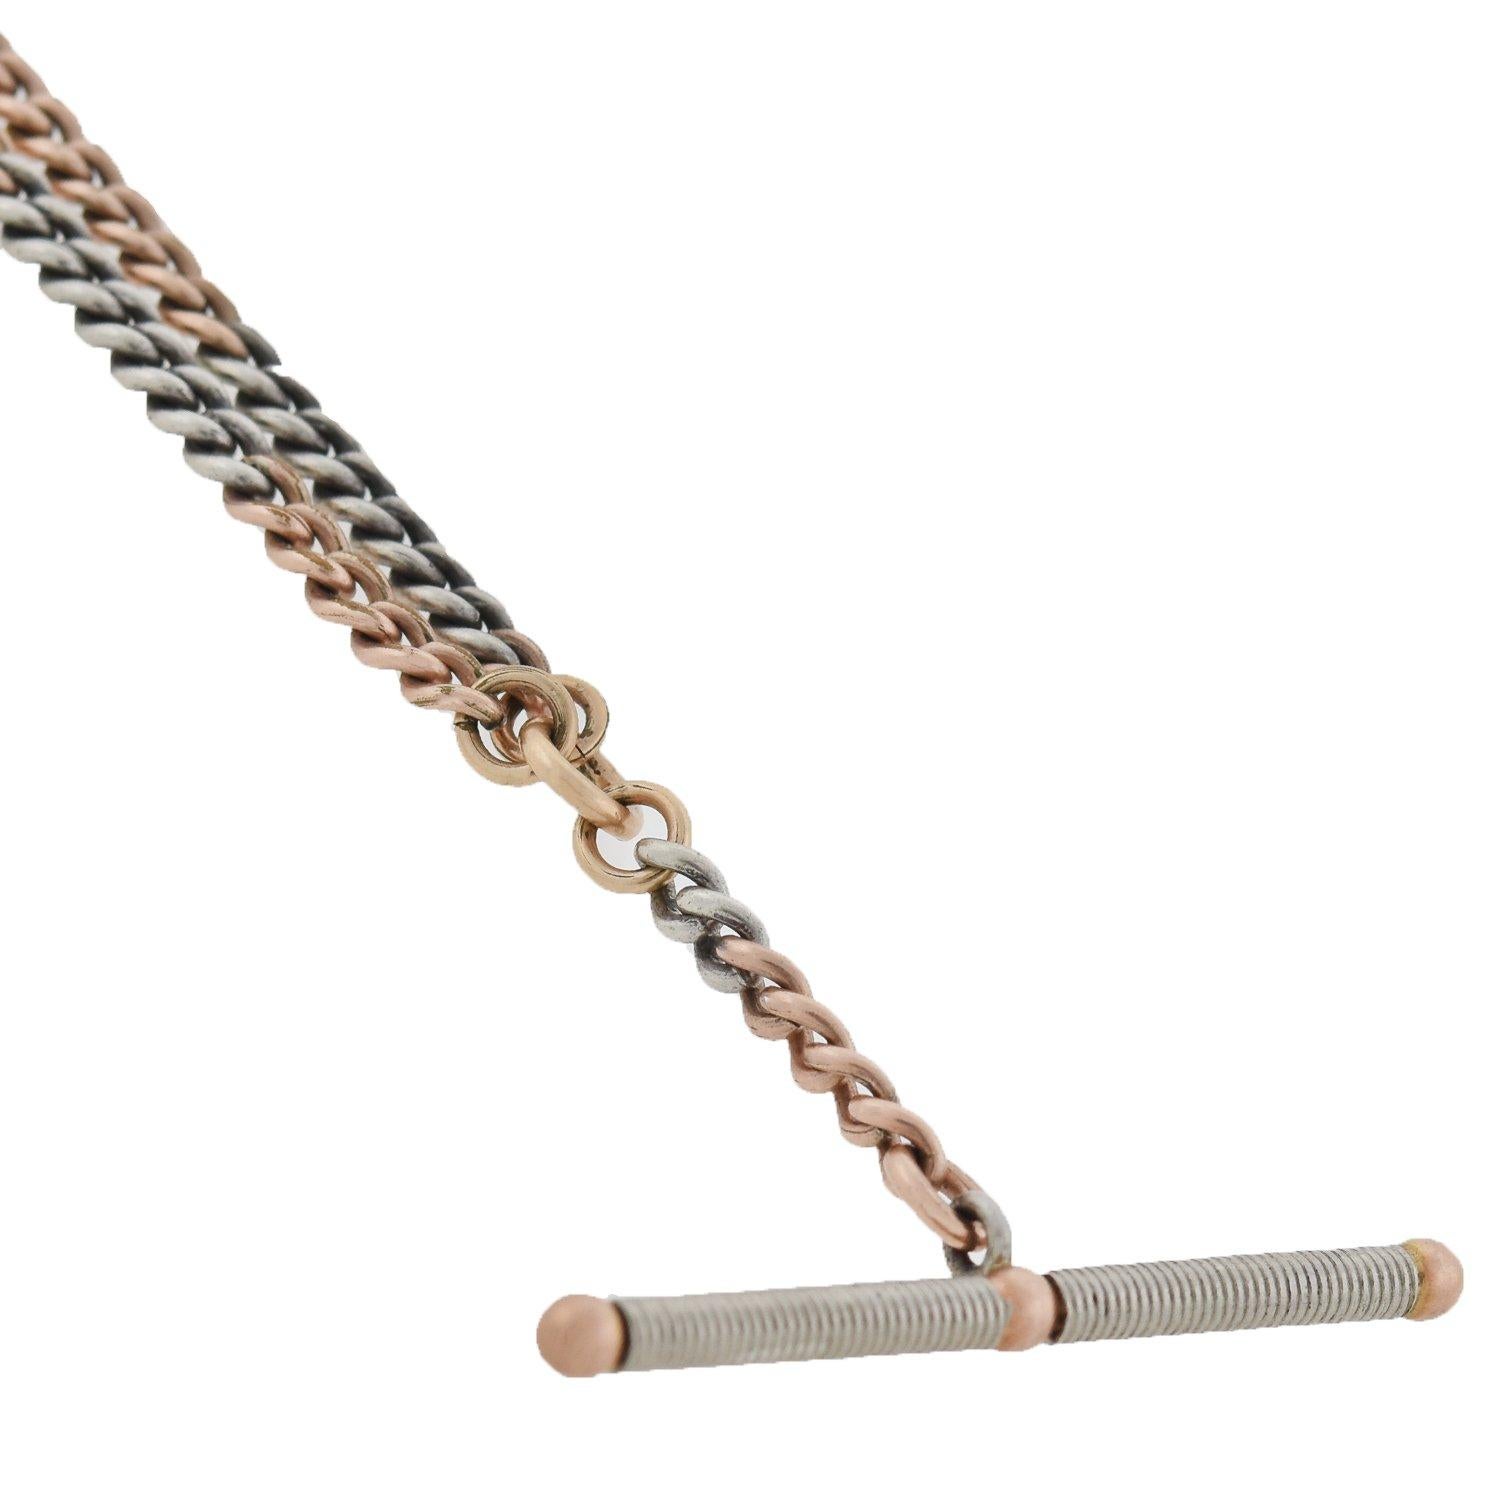 A lovely mixed metals watch chain from the Edwardian (ca1910) era! This beautiful curb link chain features a pattern of 14kt rose gold chain that alternates with sections of platinum links, coming together to create a wonderful two-tone appeal. A